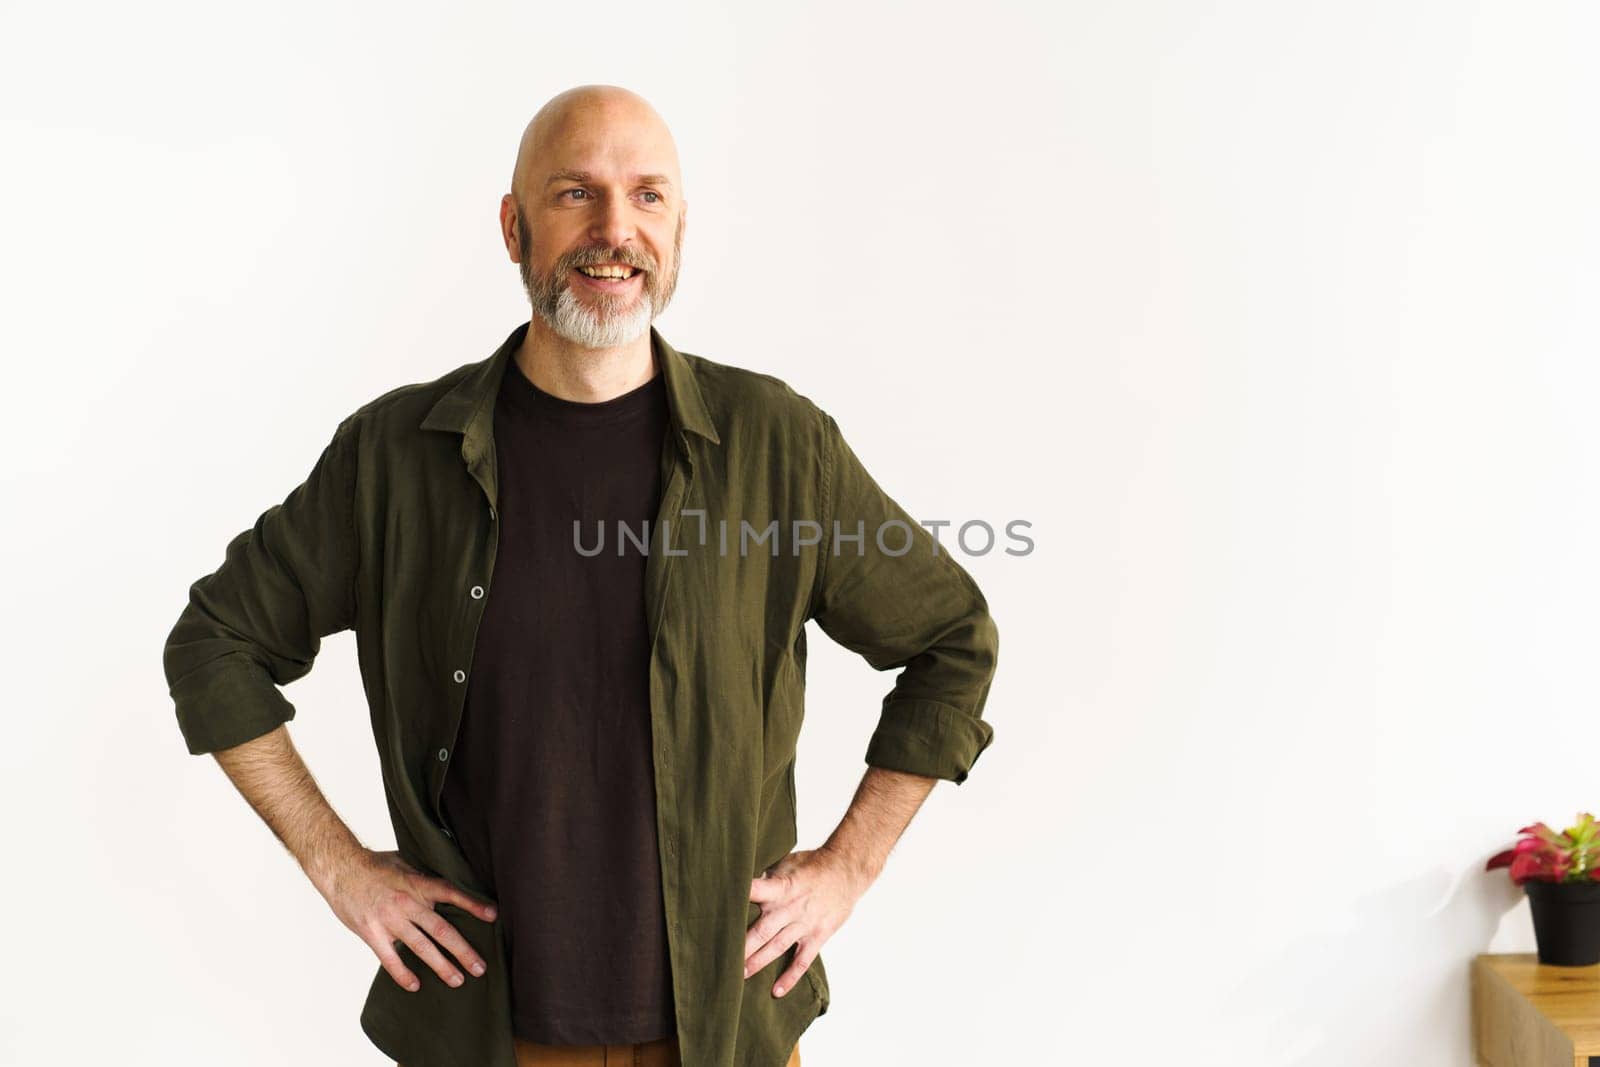 Smiling mid-aged bald man with silver beard standing confidently in front of white wall. His positive posture and expression radiate happiness and joy, showcasing contentment and cheerful demeanor. . High quality photo